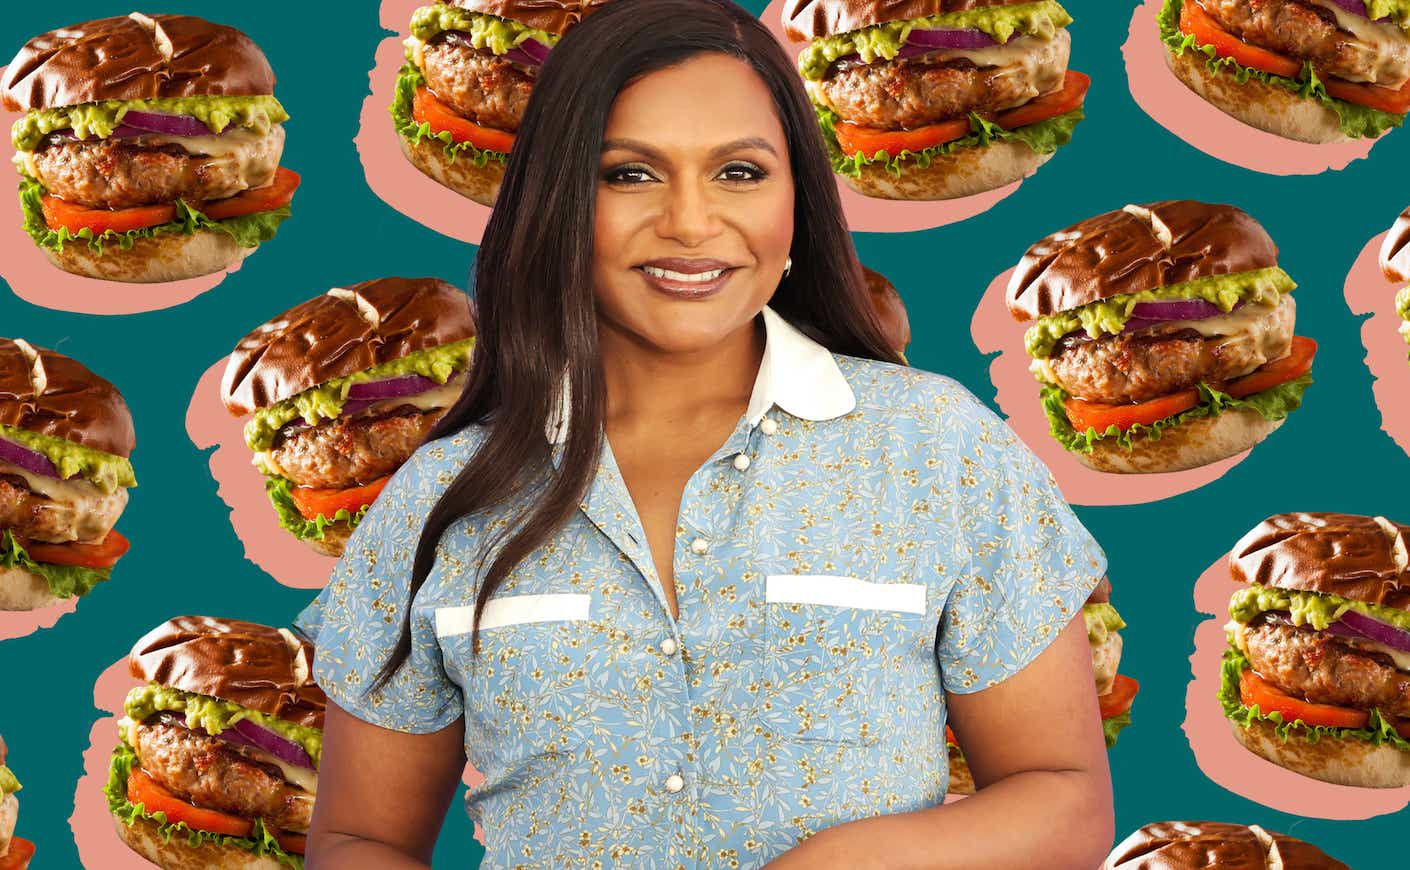 Mindy Kaling smiles as a collage of turkey burgers floats behind her head.